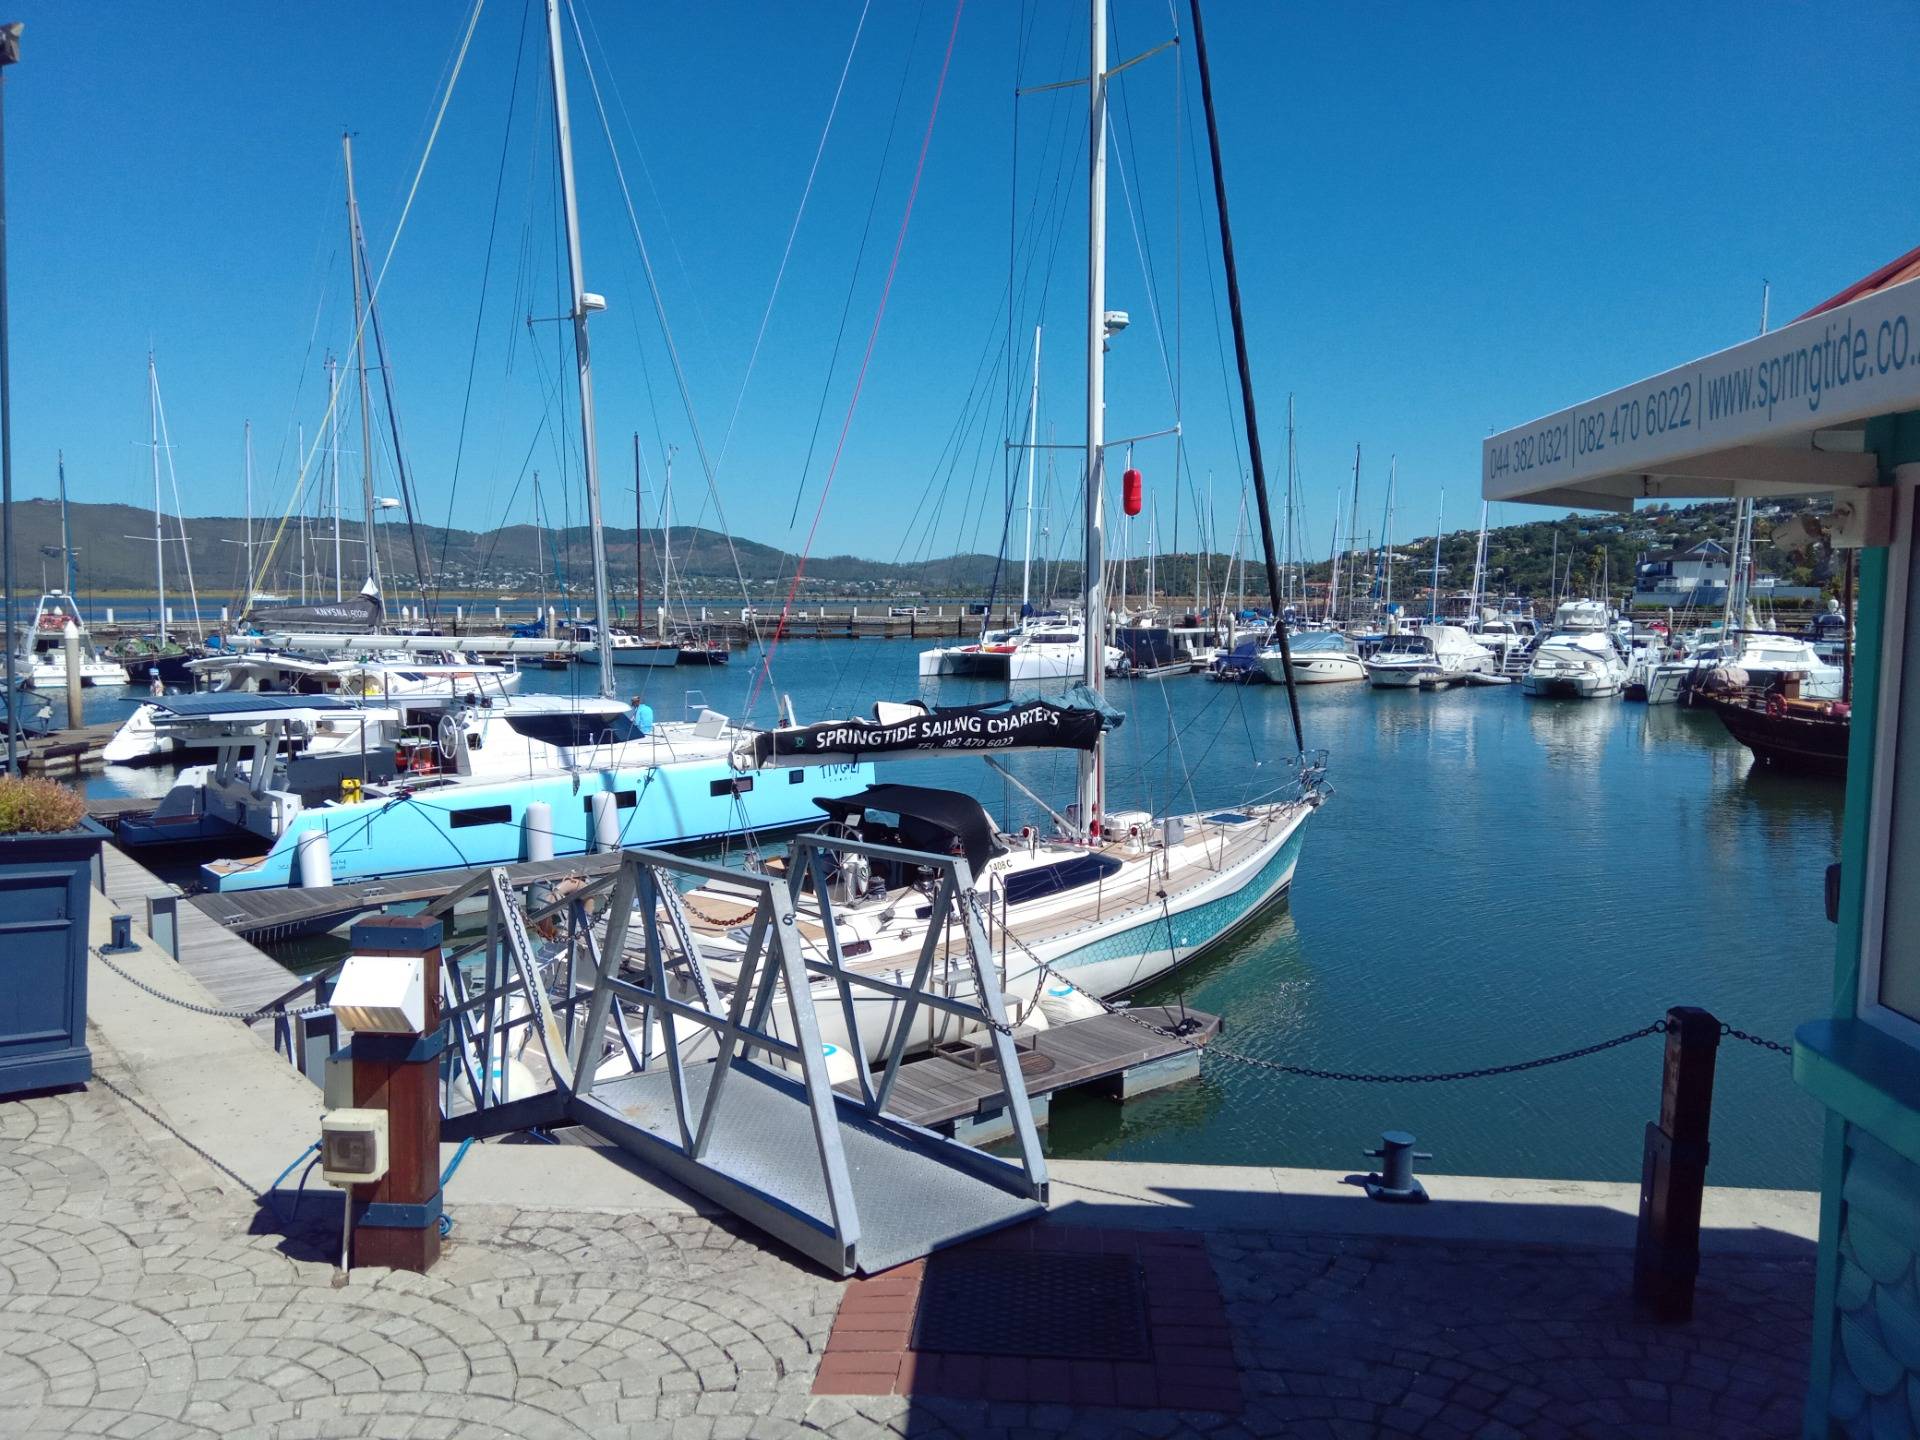 The Waterfront and quayside at Knysna lagoon, with apartments and restaurants right on the water’s edge